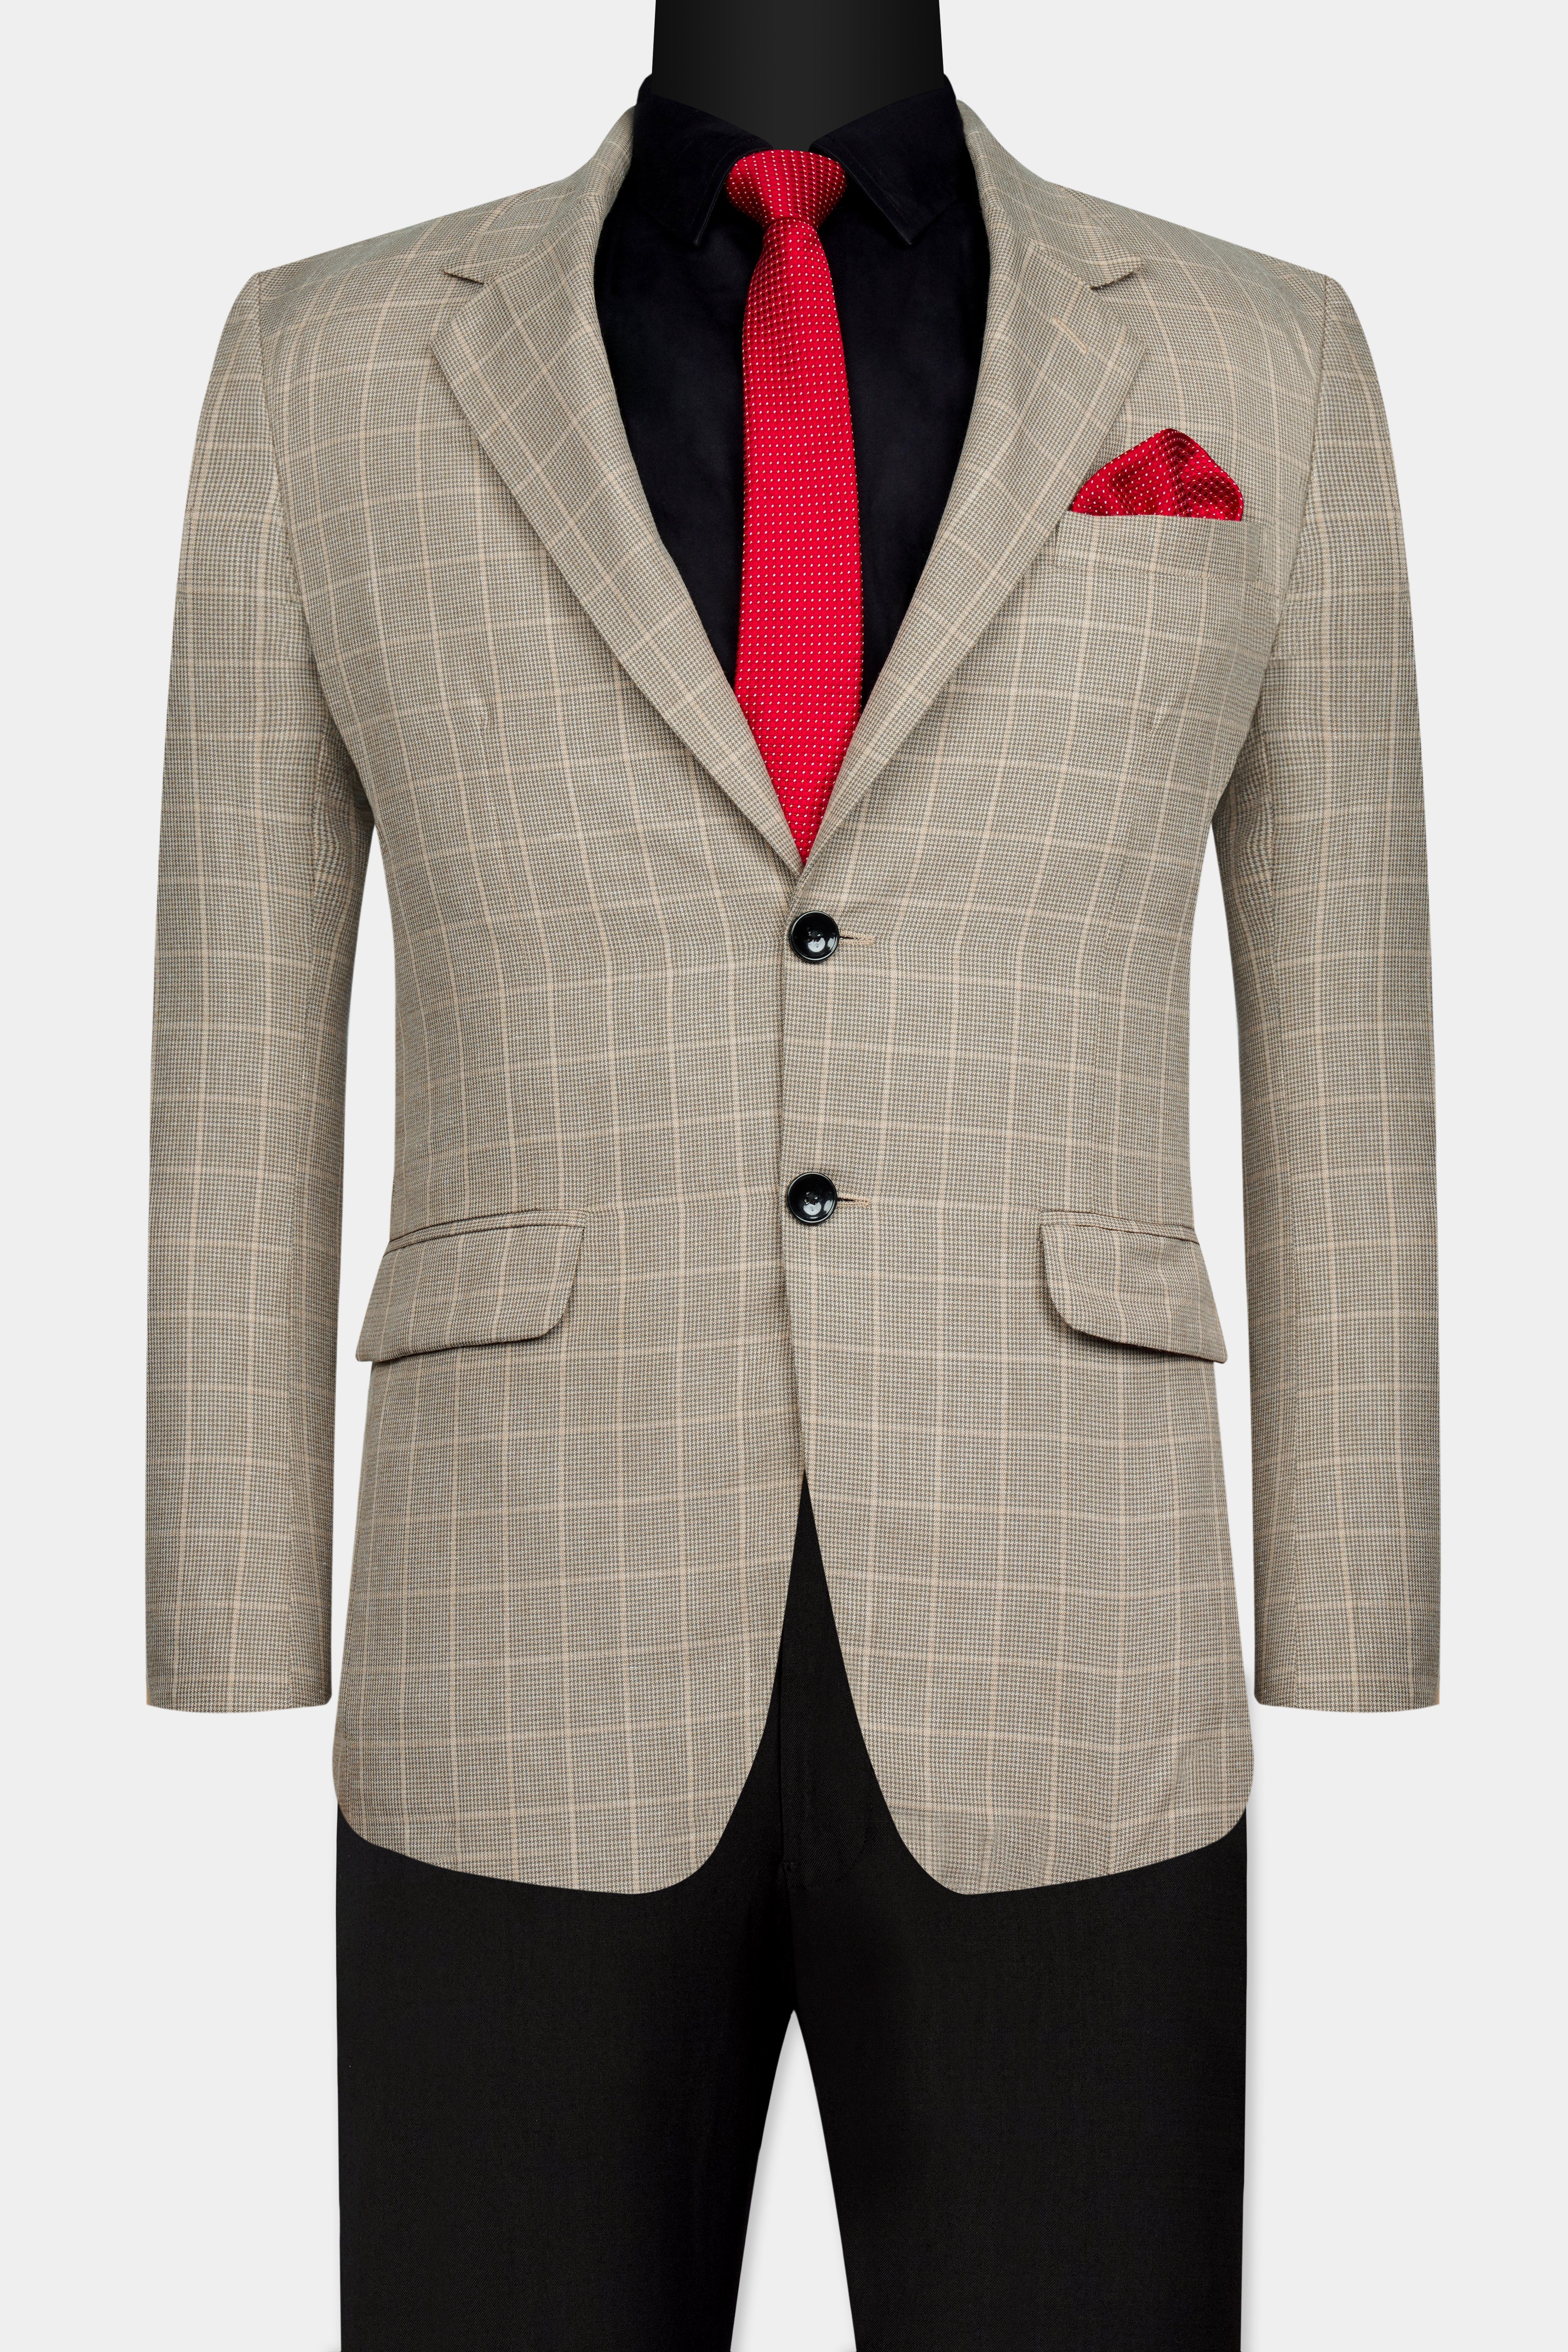 Apricot Brown Subtle Checkered Wool Rich Suit ST3008-SB-36, ST3008-SB-38, ST3008-SB-40, ST3008-SB-42, ST3008-SB-44, ST3008-SB-46, ST3008-SB-48, ST3008-SB-50, ST3008-SB-52, ST3008-SB-54, ST3008-SB-56, ST3008-SB-58, ST3008-SB-60